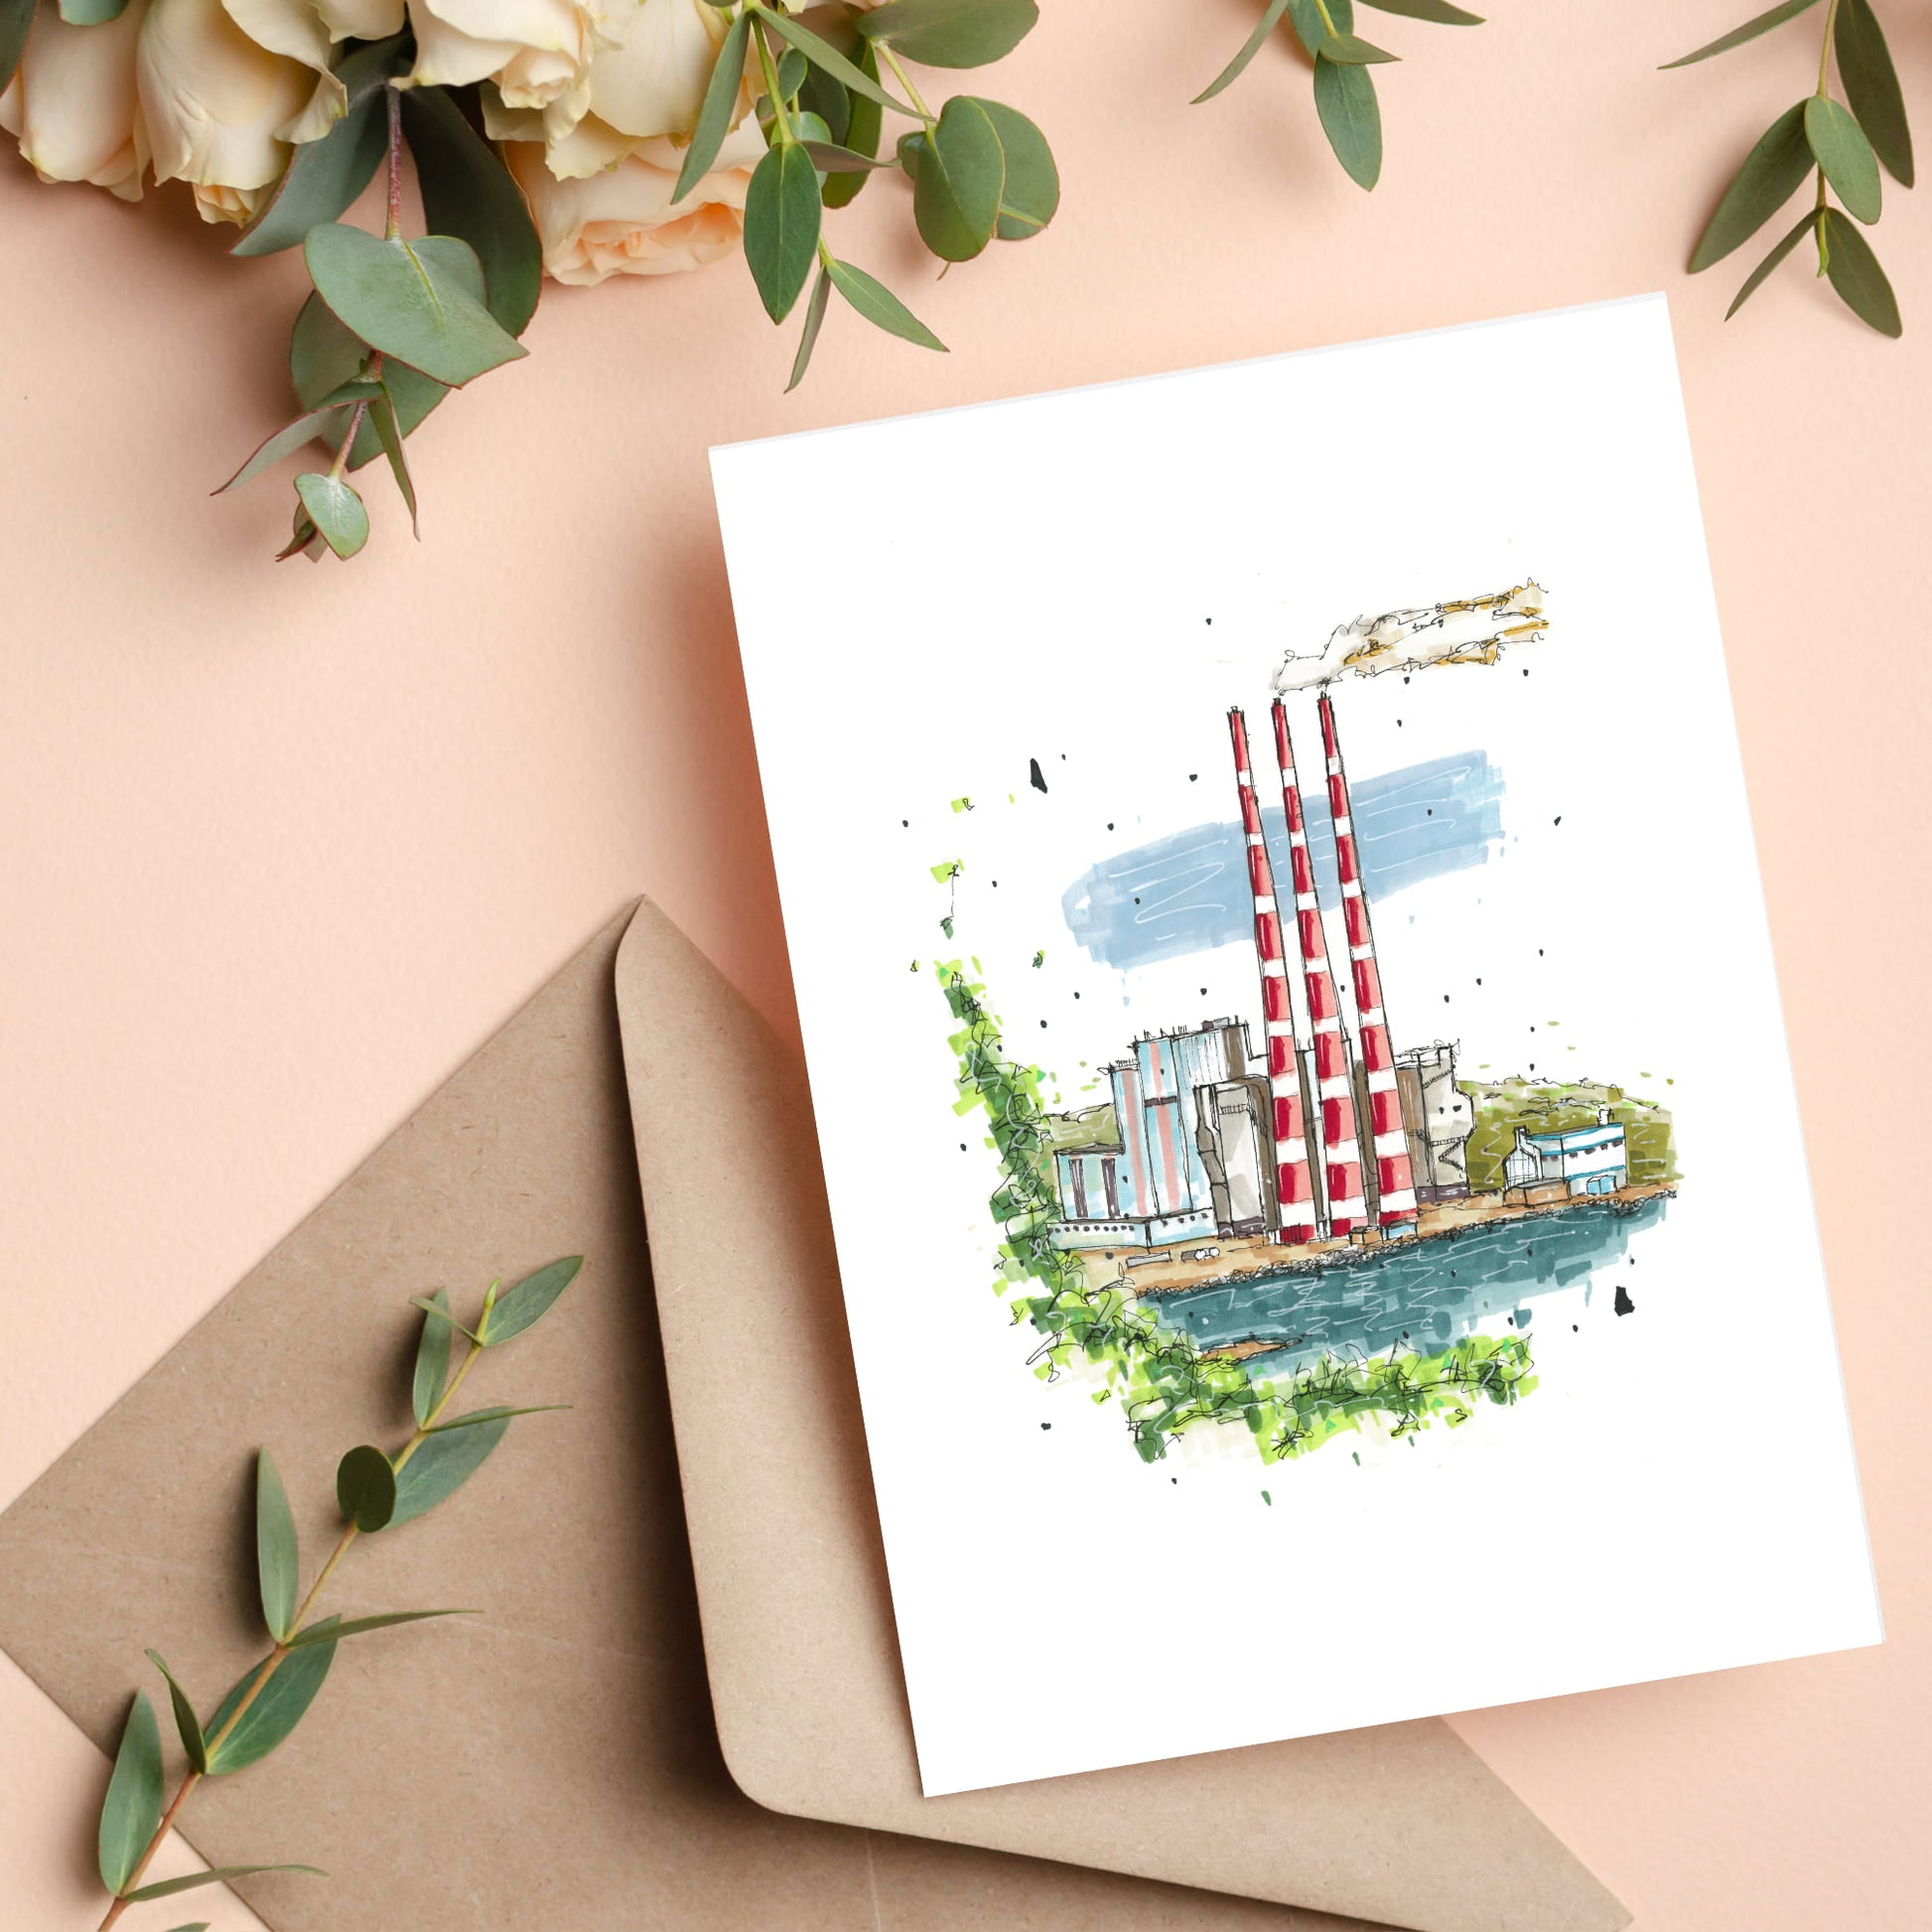 Tufts Cove Generating Station in Colour, Dartmouth, Nova Scotia, Greeting Card, Downtownsketcher, Wynand van Niekerk, DTS0062